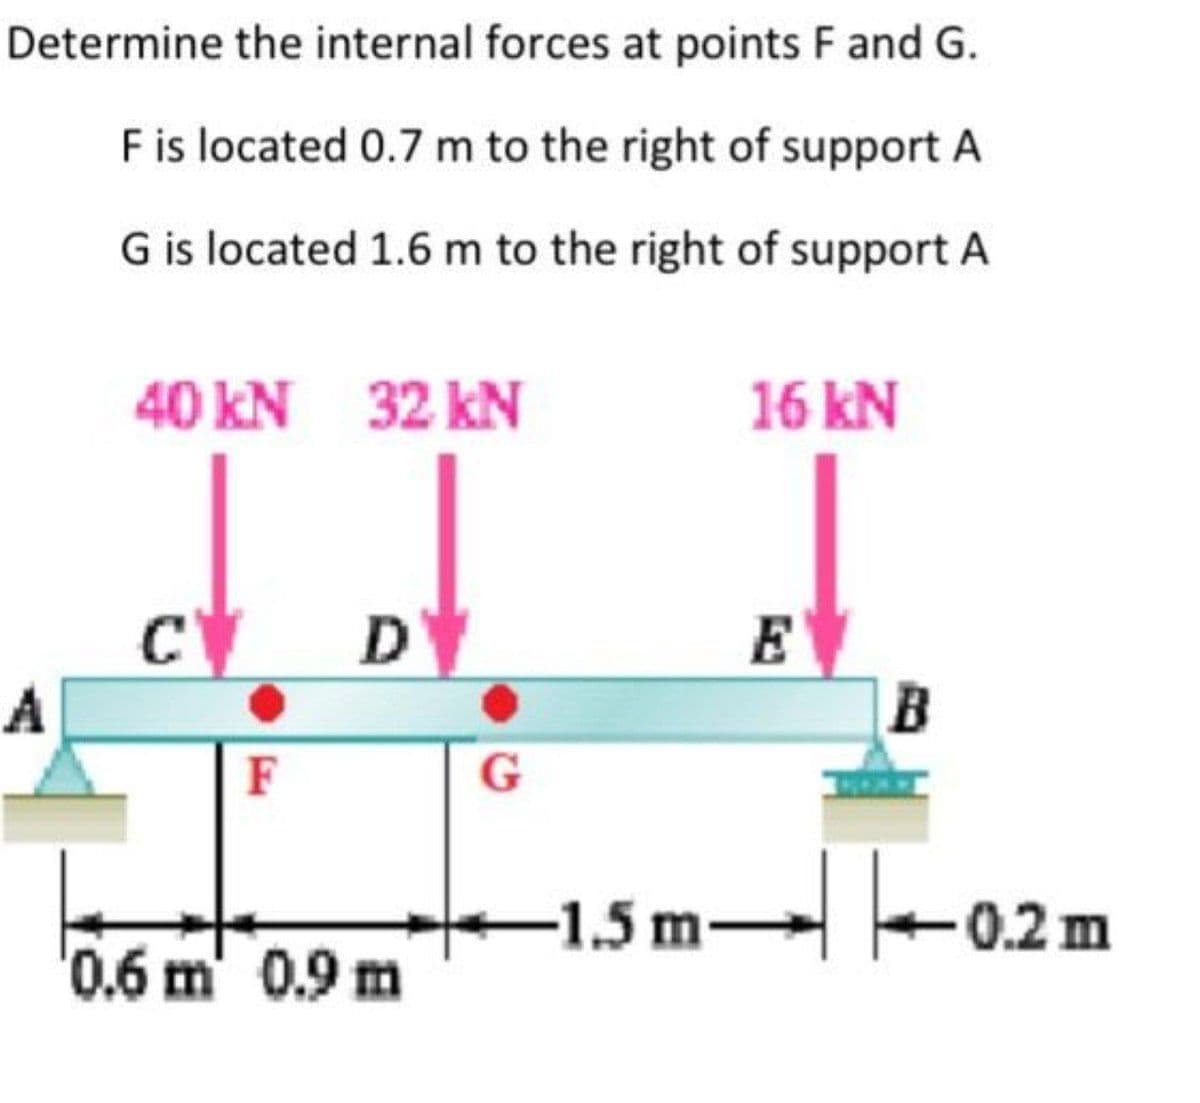 Determine the internal forces at points F and G.
F is located 0.7 m to the right of support A
G is located 1.6 m to the right of support A
40 kN 32 KN
16 kN
C D
E
F
'0.6 m' 0.9 m
A
G
B
-1.5 m 0.
-0.2 m